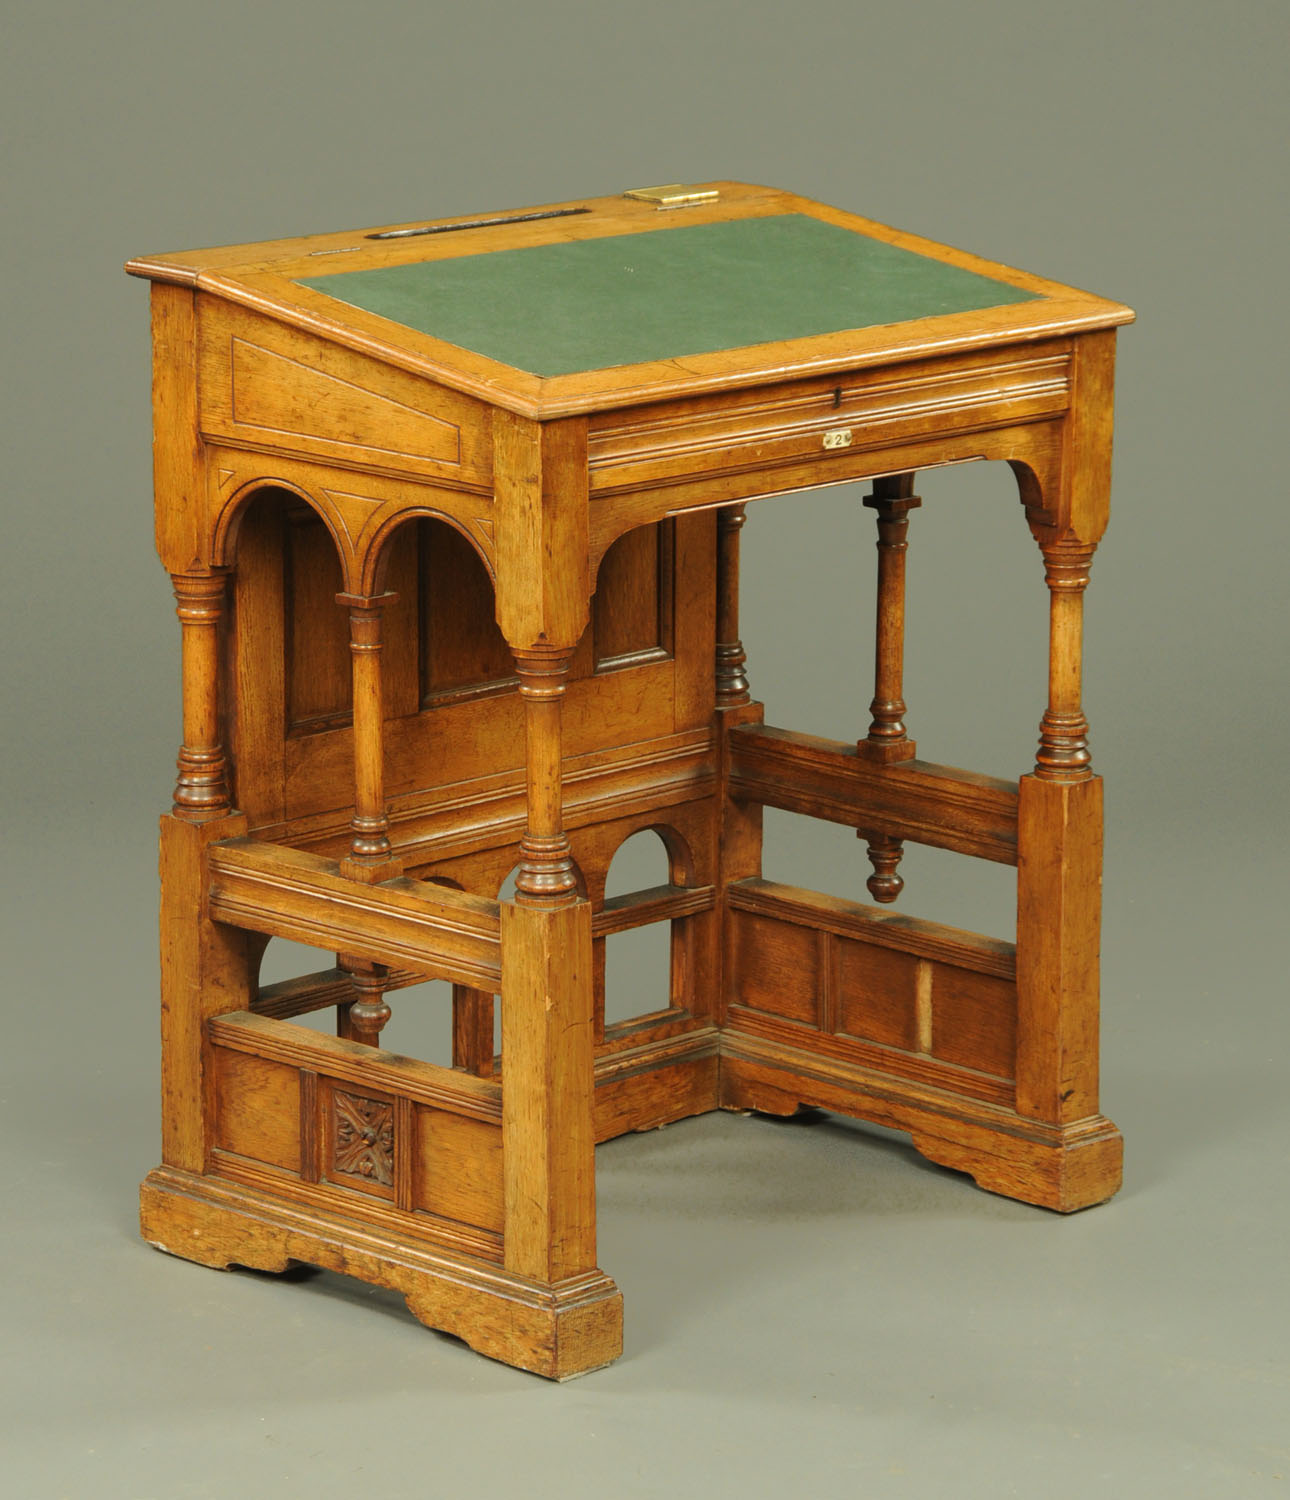 Attributed to Gillows of Lancaster, for Kendal Town Council meeting room, a golden oak writing desk,